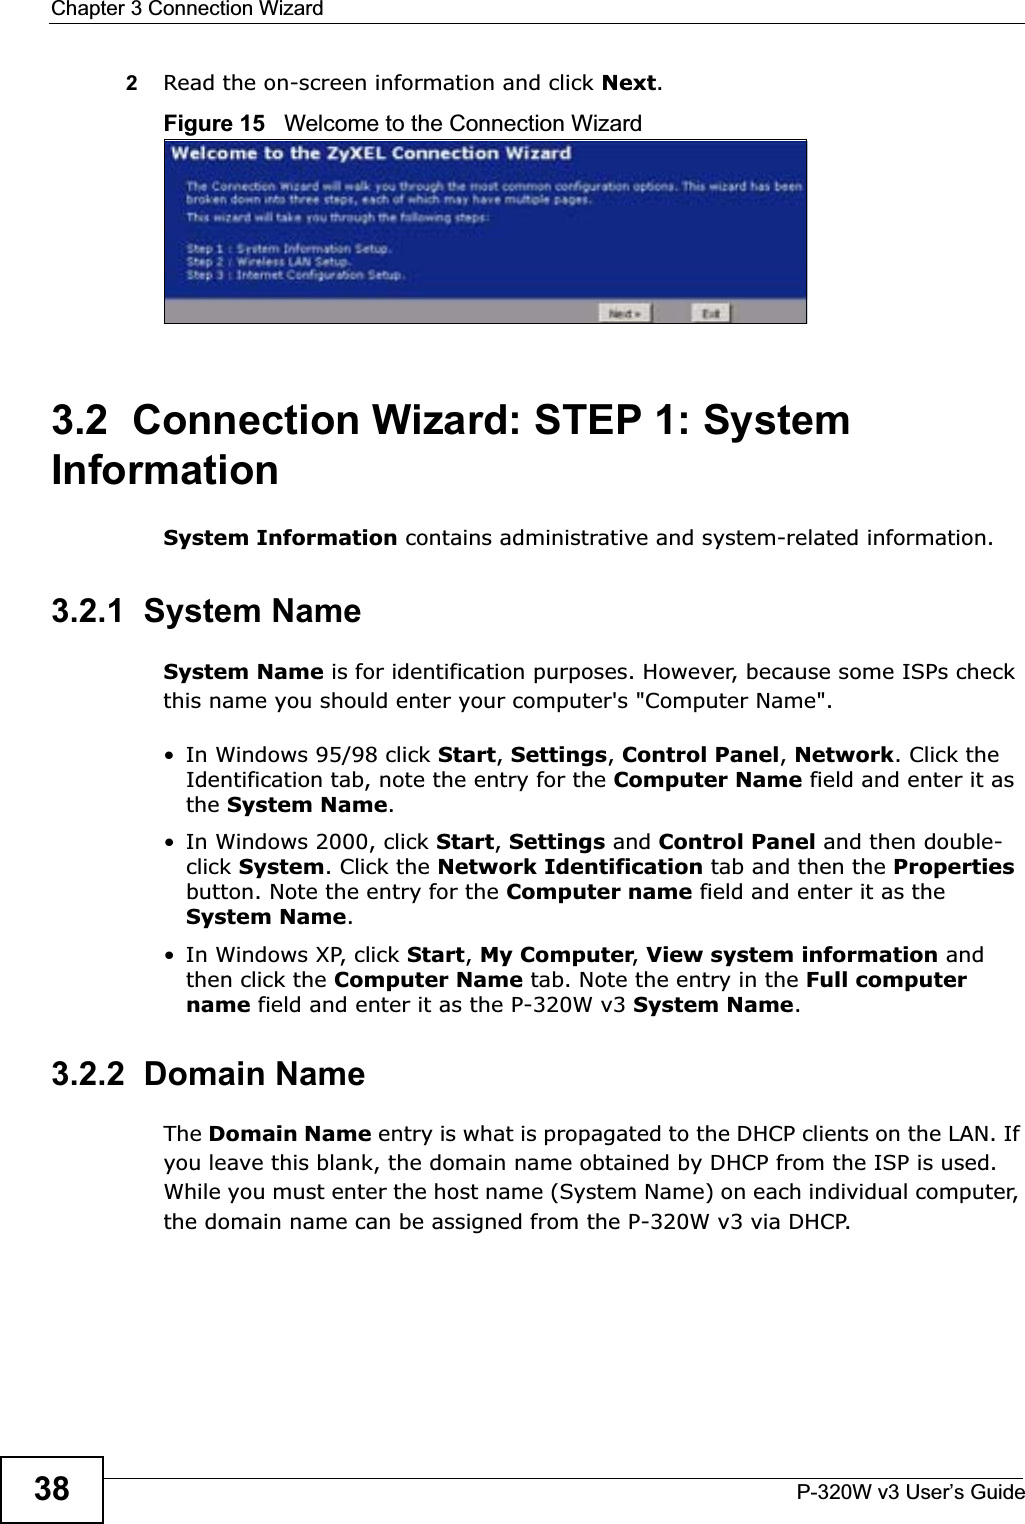 Chapter 3 Connection WizardP-320W v3 User’s Guide382Read the on-screen information and click Next.Figure 15   Welcome to the Connection Wizard3.2  Connection Wizard: STEP 1: System InformationSystem Information contains administrative and system-related information.3.2.1  System NameSystem Name is for identification purposes. However, because some ISPs check this name you should enter your computer&apos;s &quot;Computer Name&quot;. • In Windows 95/98 click Start, Settings, Control Panel, Network. Click the Identification tab, note the entry for the Computer Name field and enter it as the System Name.• In Windows 2000, click Start, Settings and Control Panel and then double-click System. Click the Network Identification tab and then the Propertiesbutton. Note the entry for the Computer name field and enter it as the System Name.• In Windows XP, click Start, My Computer, View system information and then click the Computer Name tab. Note the entry in the Full computer name field and enter it as the P-320W v3 System Name.3.2.2  Domain NameThe Domain Name entry is what is propagated to the DHCP clients on the LAN. If you leave this blank, the domain name obtained by DHCP from the ISP is used. While you must enter the host name (System Name) on each individual computer, the domain name can be assigned from the P-320W v3 via DHCP.